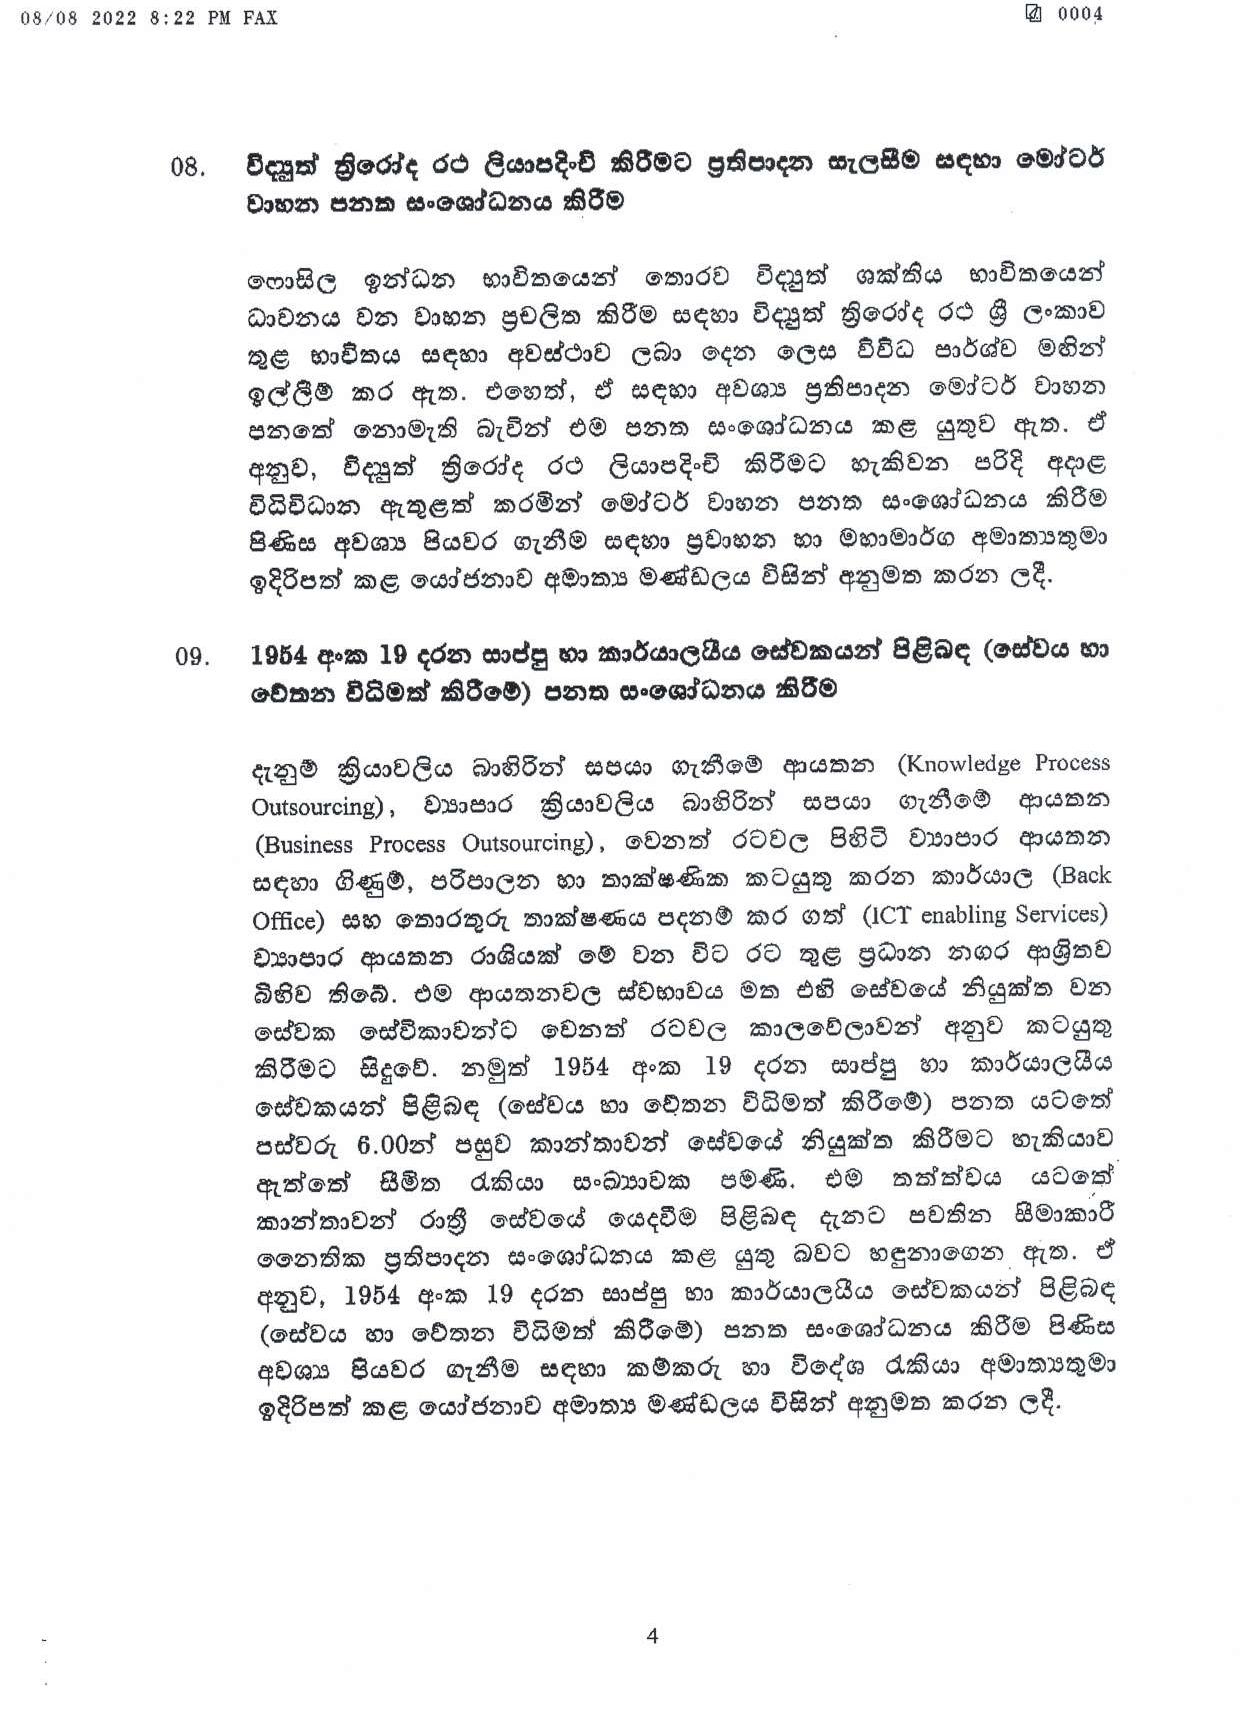 Cabinet Decisions on 08.08.2022 page 004